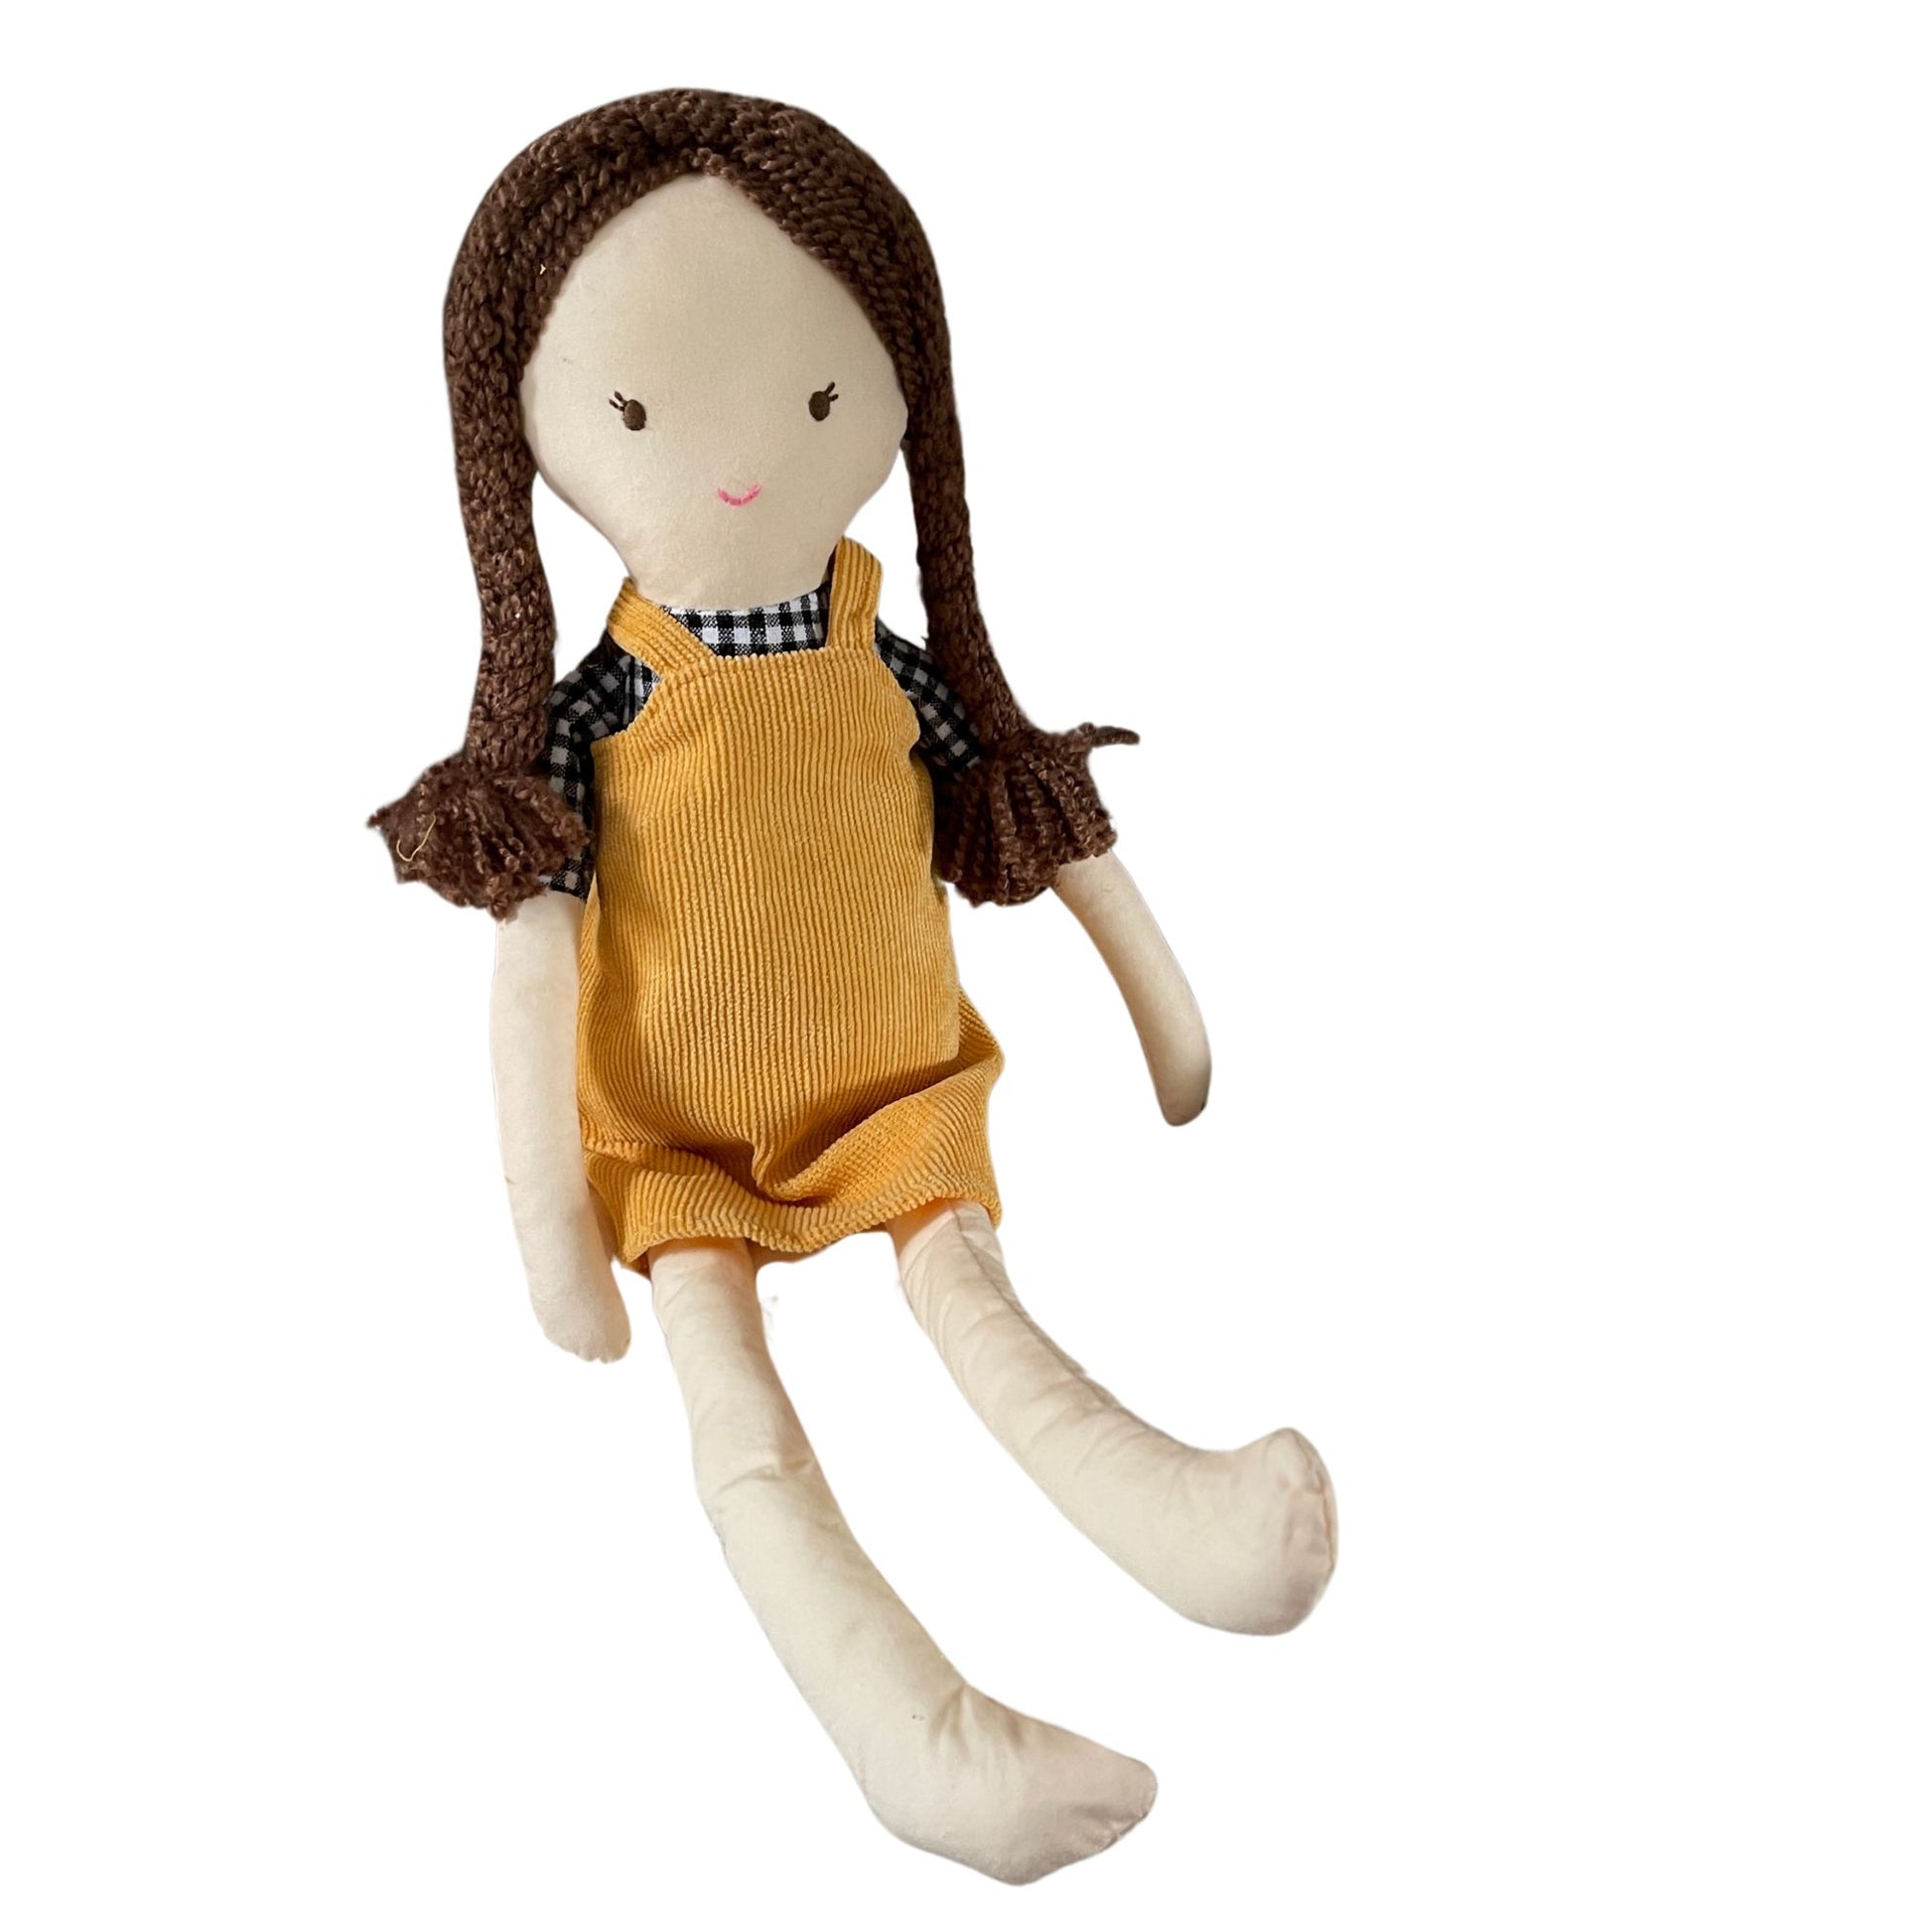 Arabella doll soft toy. Cute little ragdoll style soft toy with brown platted hair. She is wearing a checkered black and white shirt and mustard coloured corduroy dress.